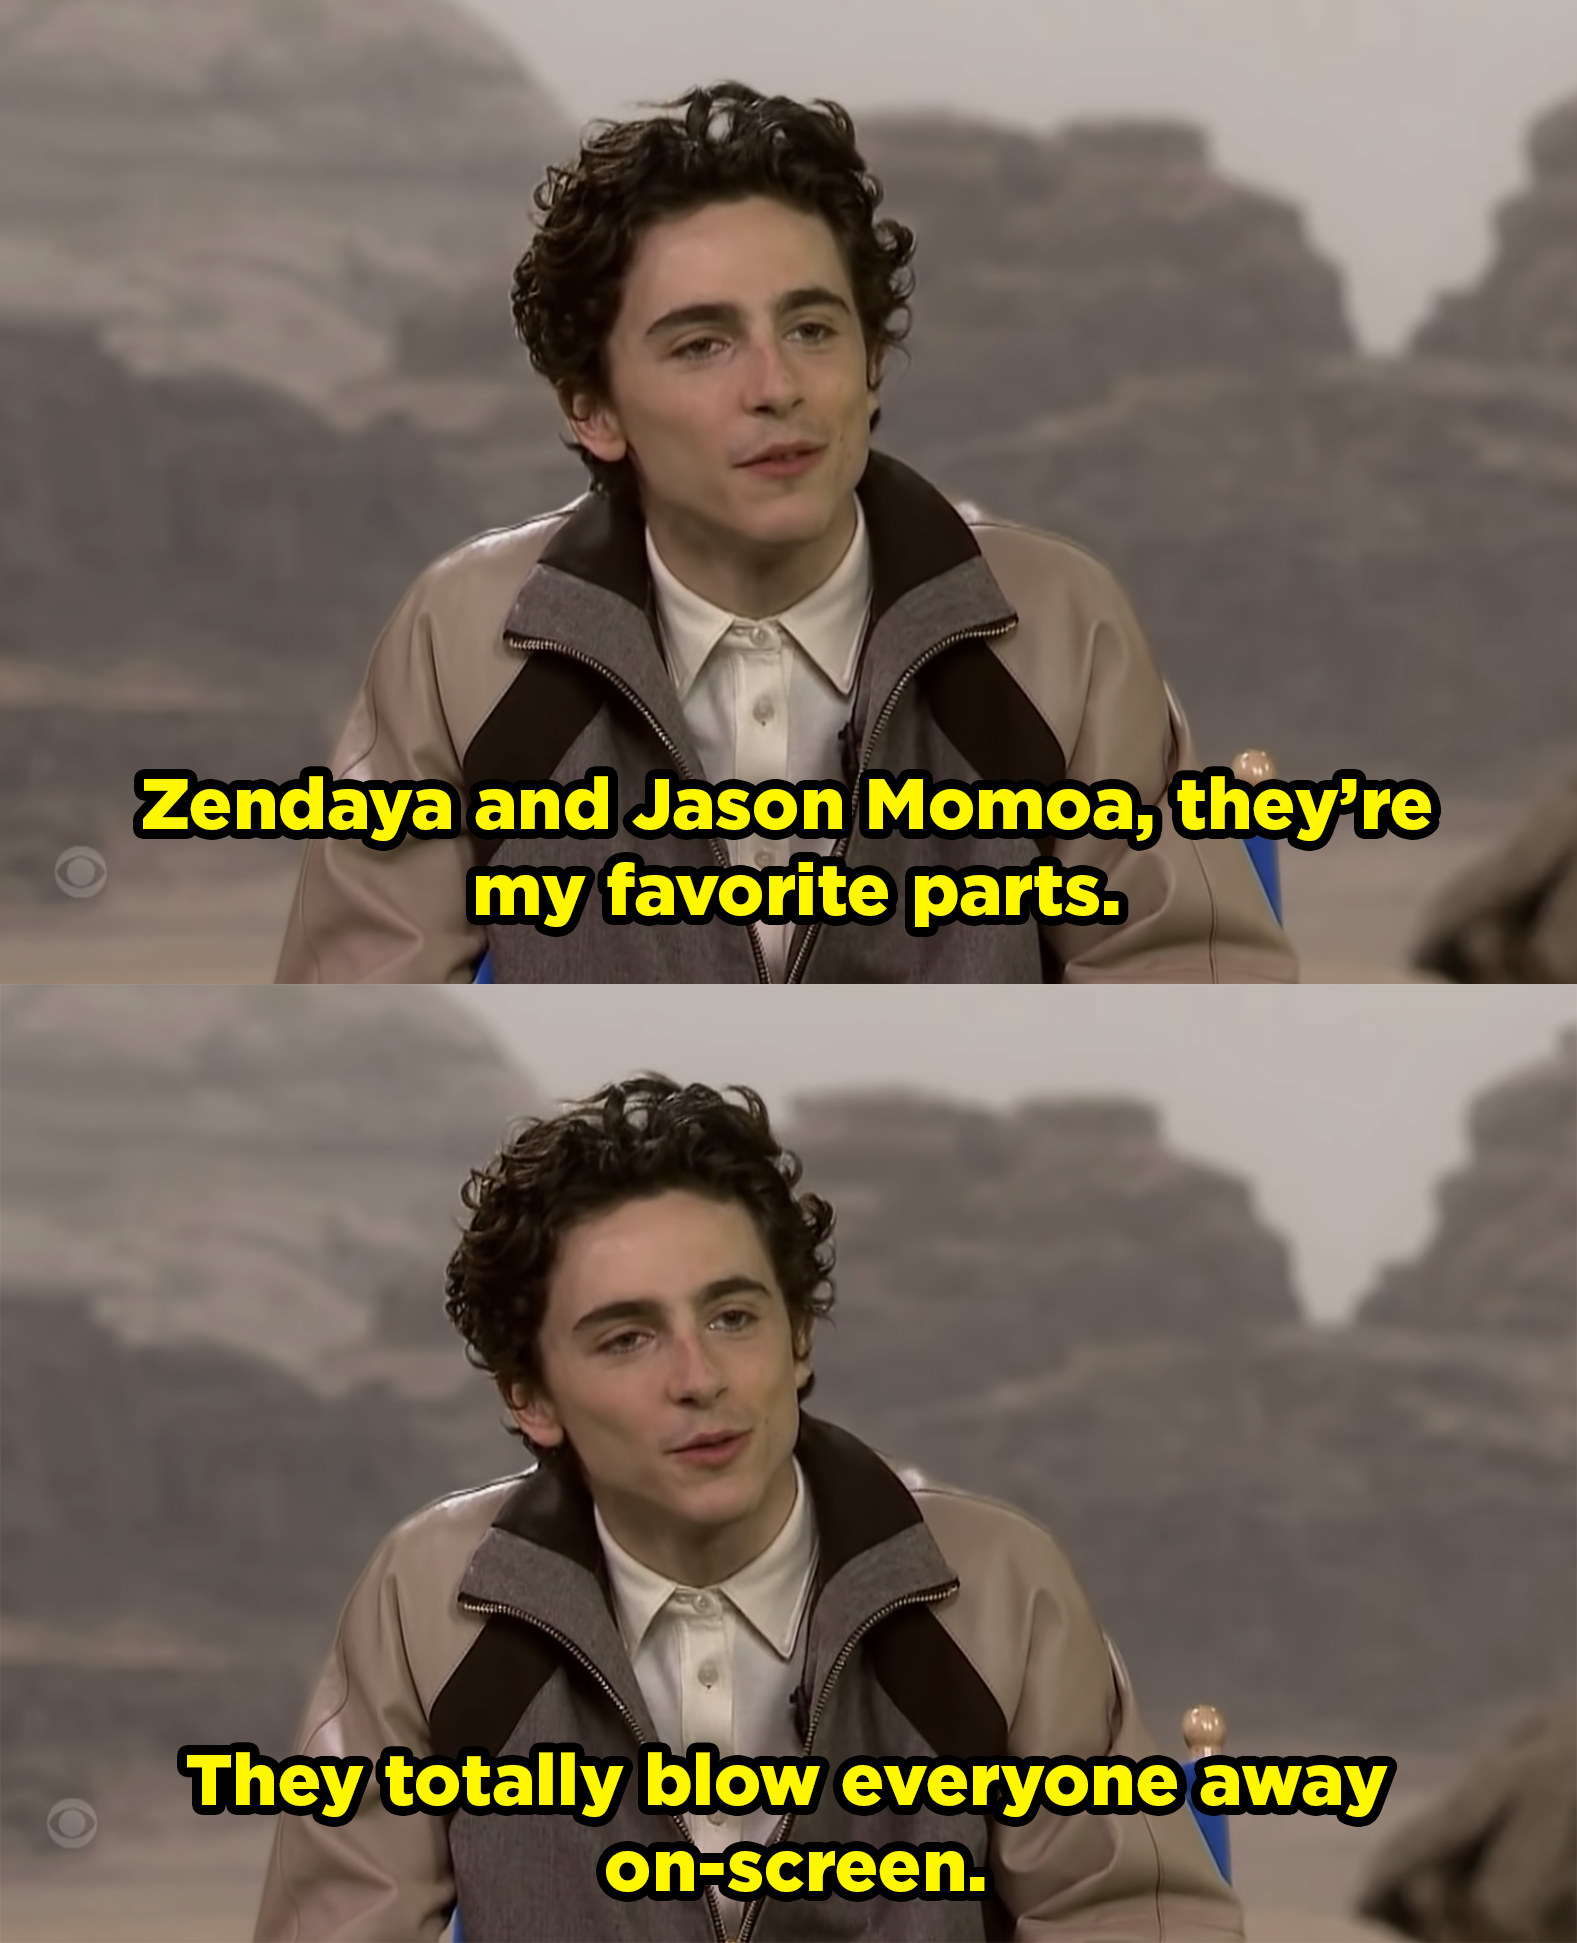 Timmy says Zendaya and Jason are his favorite parts because they blow everyone away on-screen.